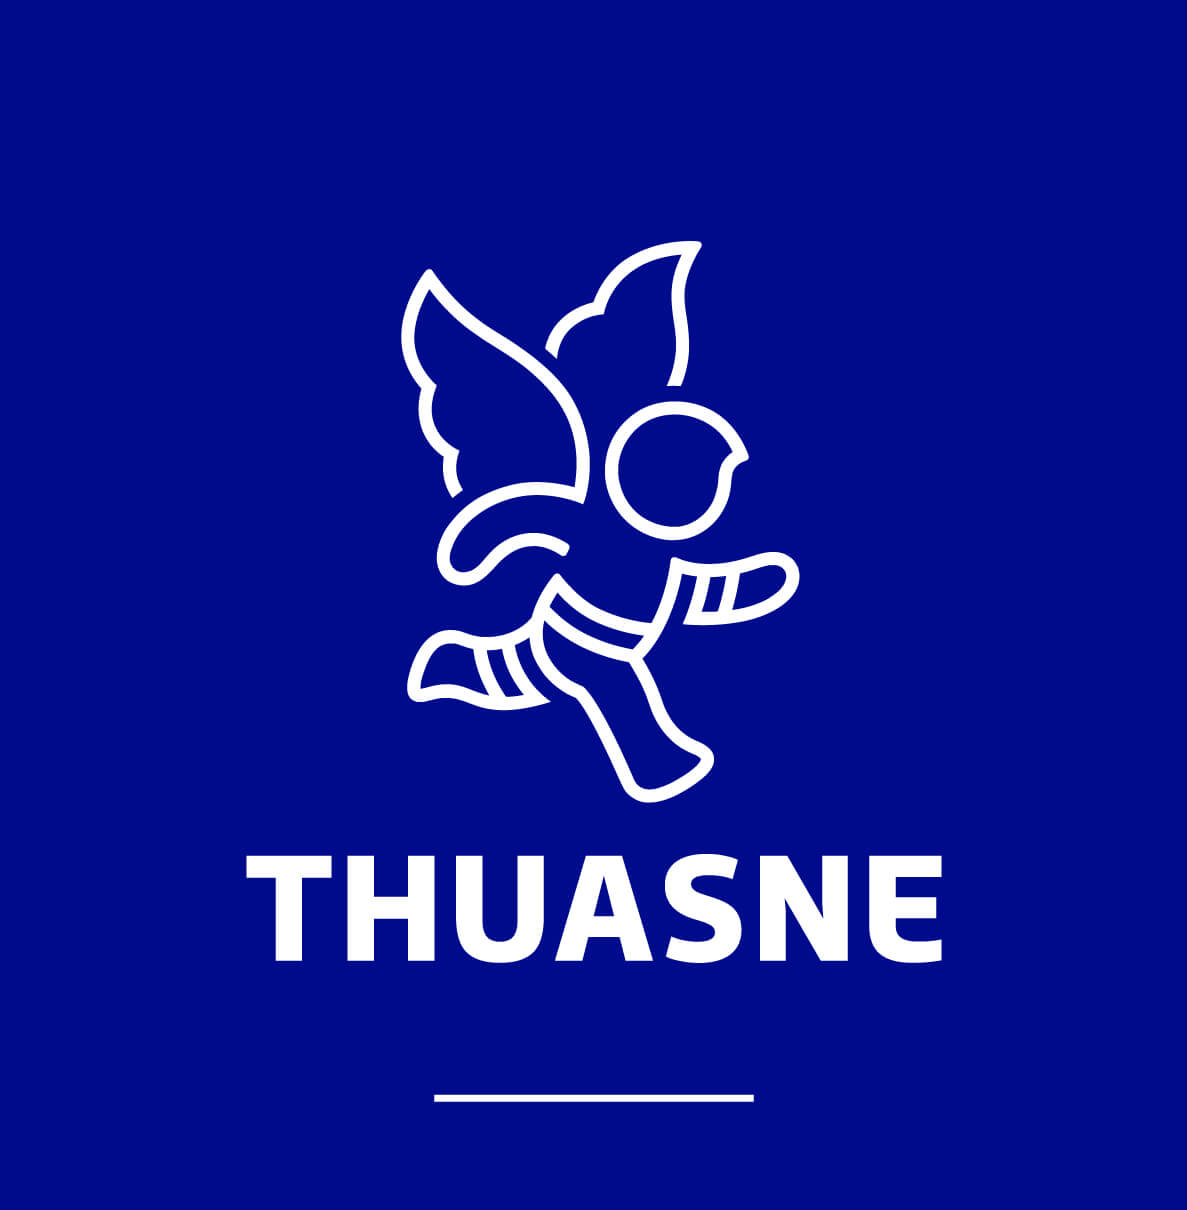 Thuasne USA offers support to customers through Competitive Bidding Resource Center - Image